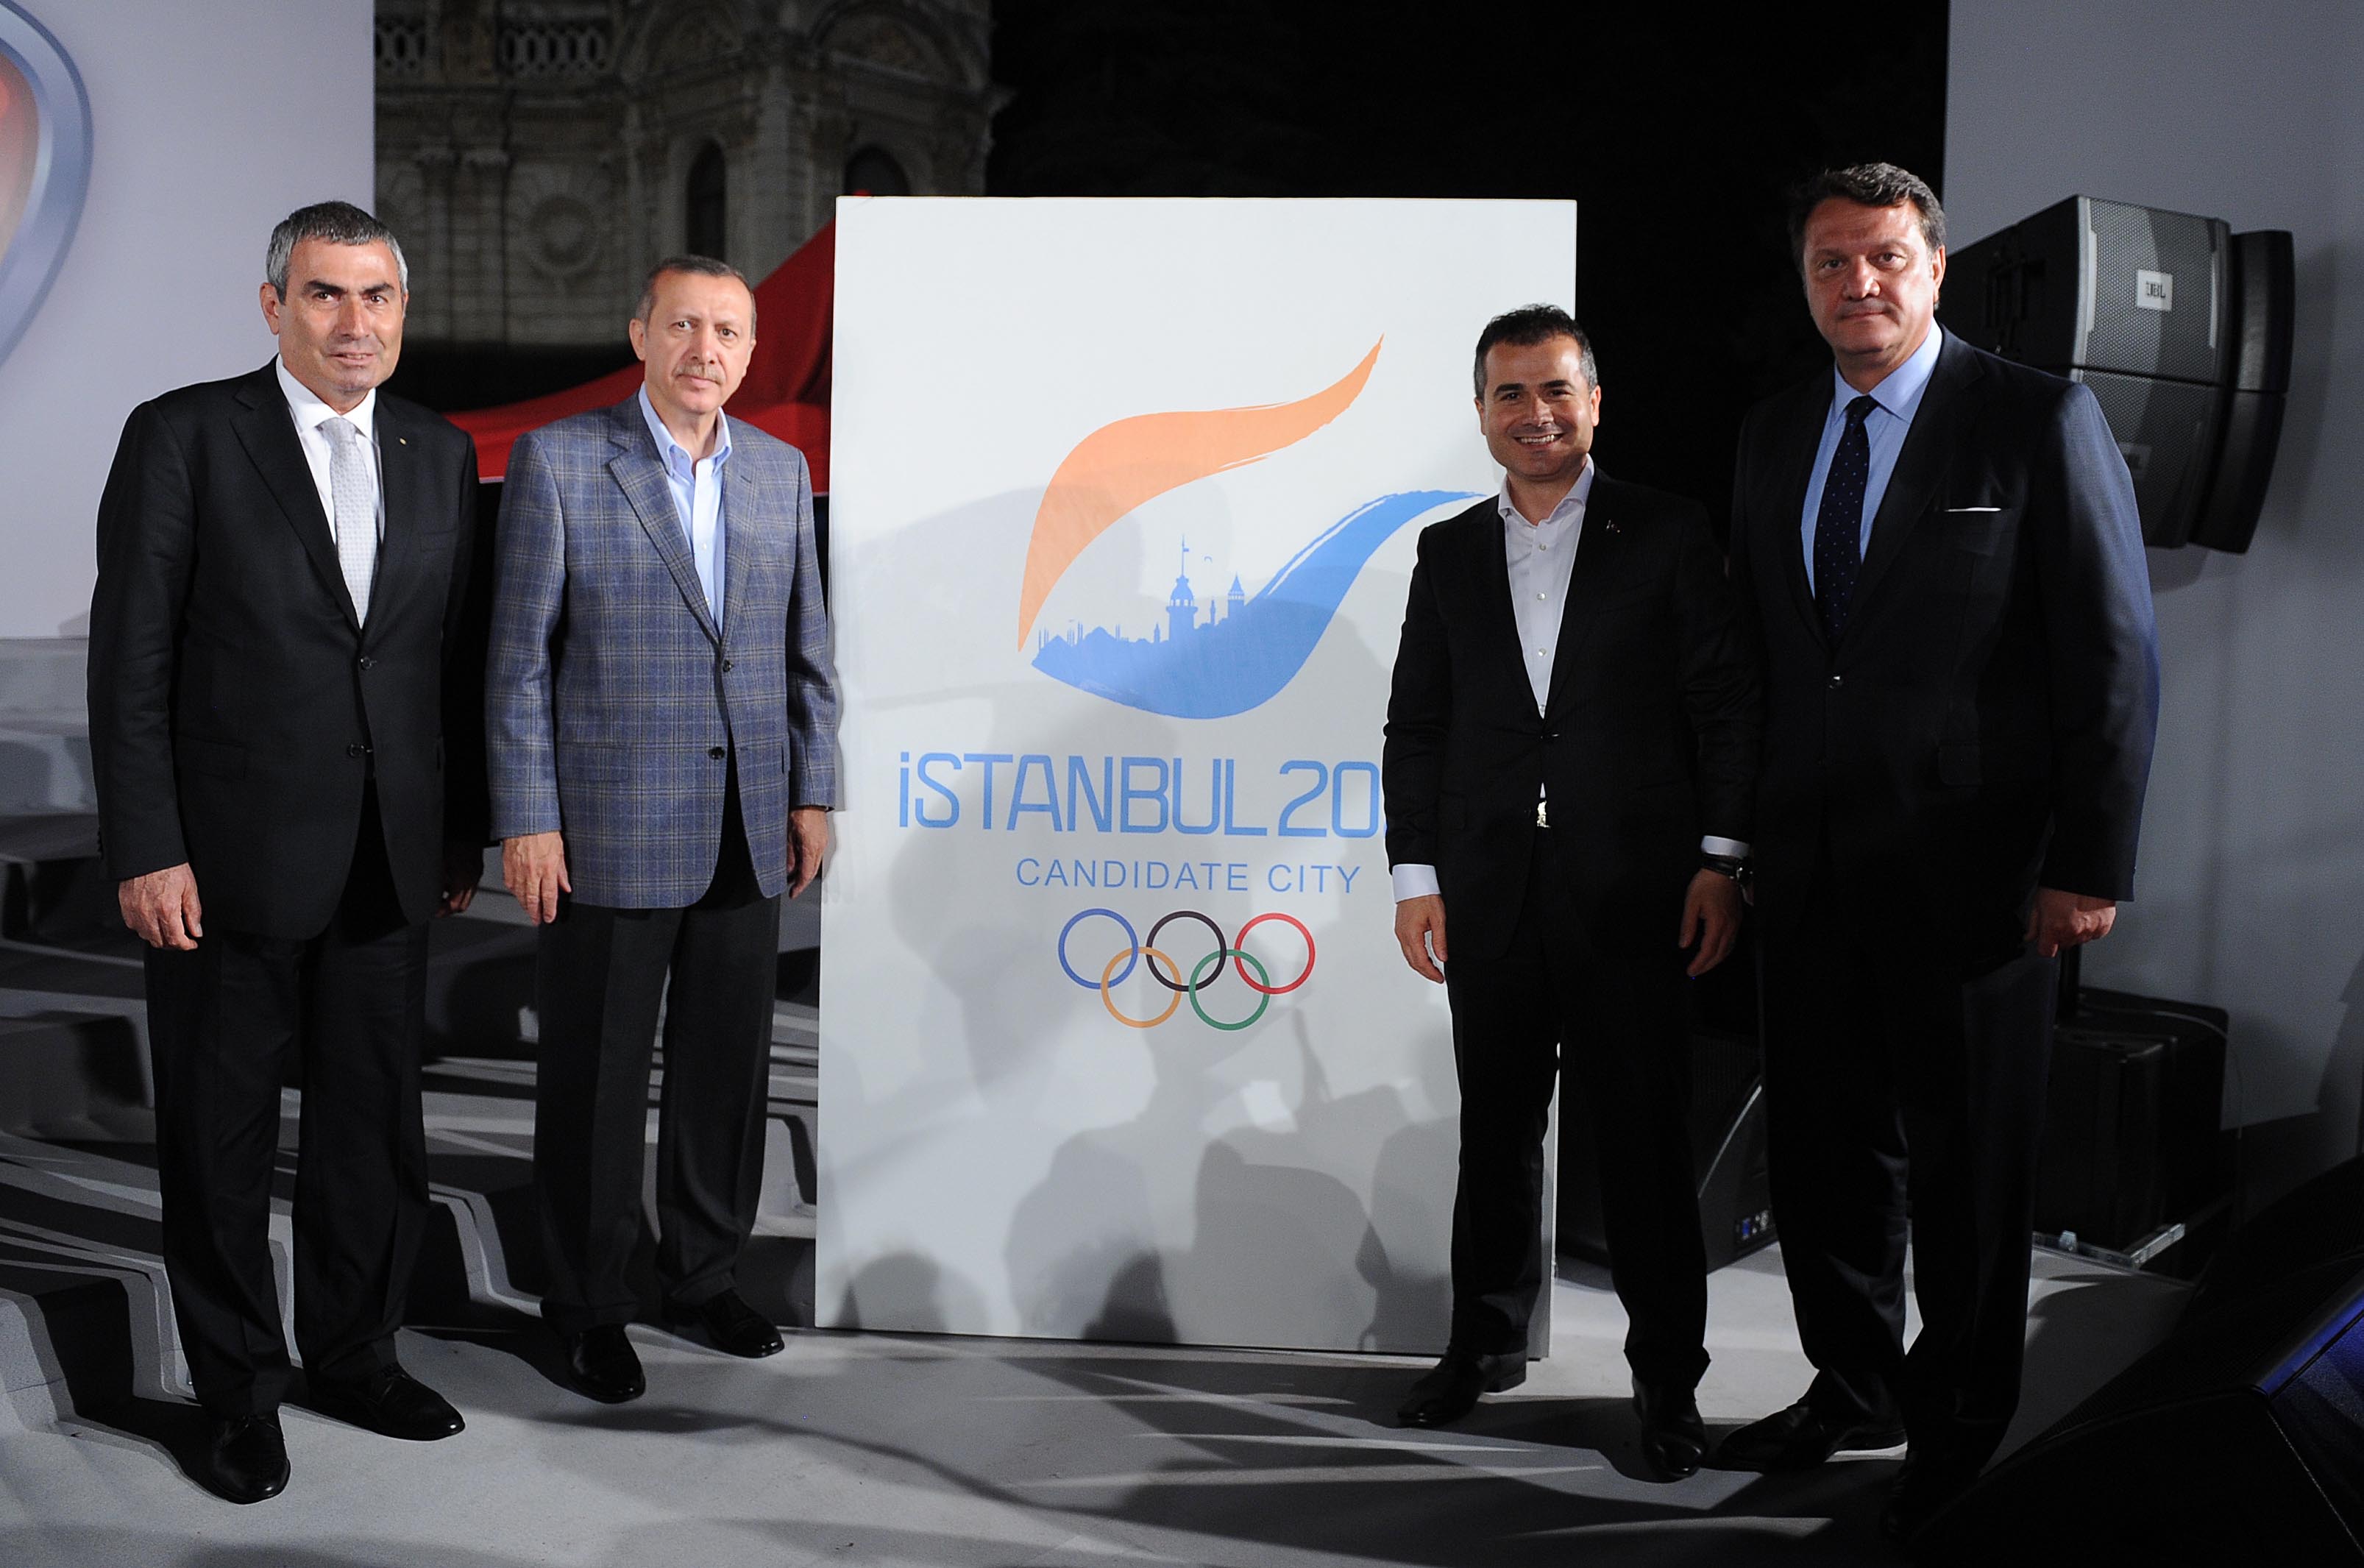 Launch of Istanbul 2020 logo